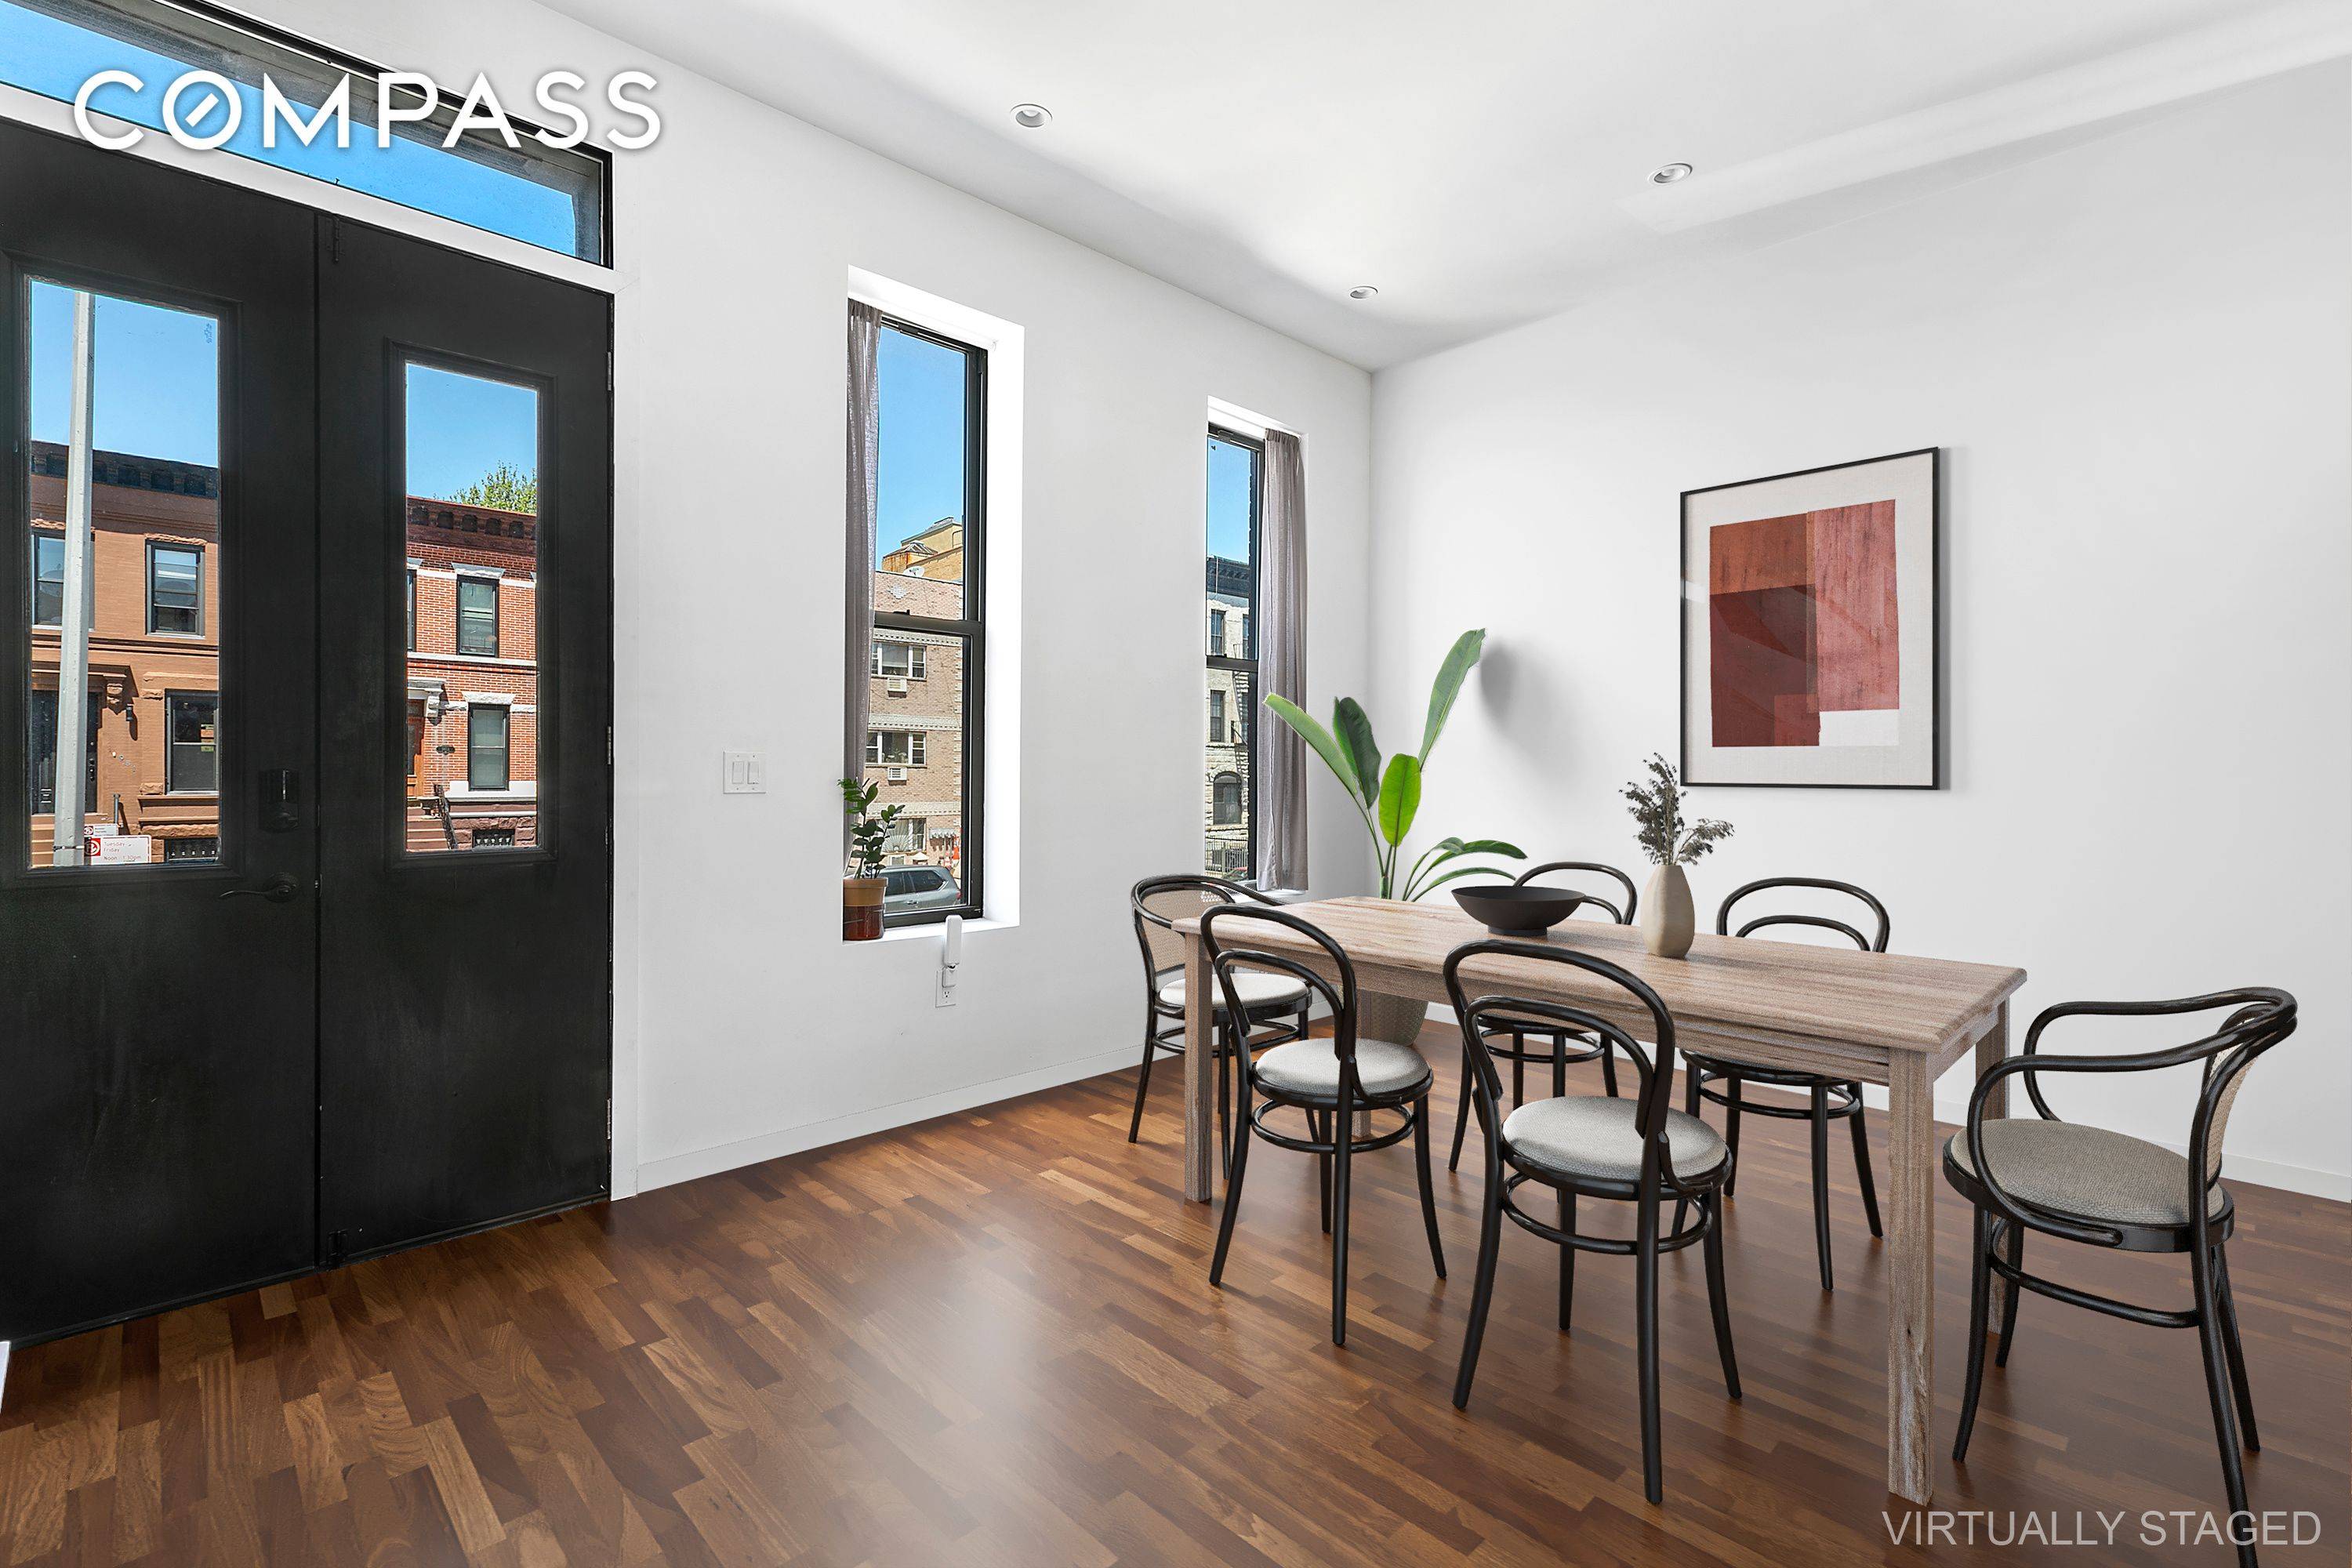 One of a kind Beautifully renovated luxury two family brownstone in Bed Stuy.